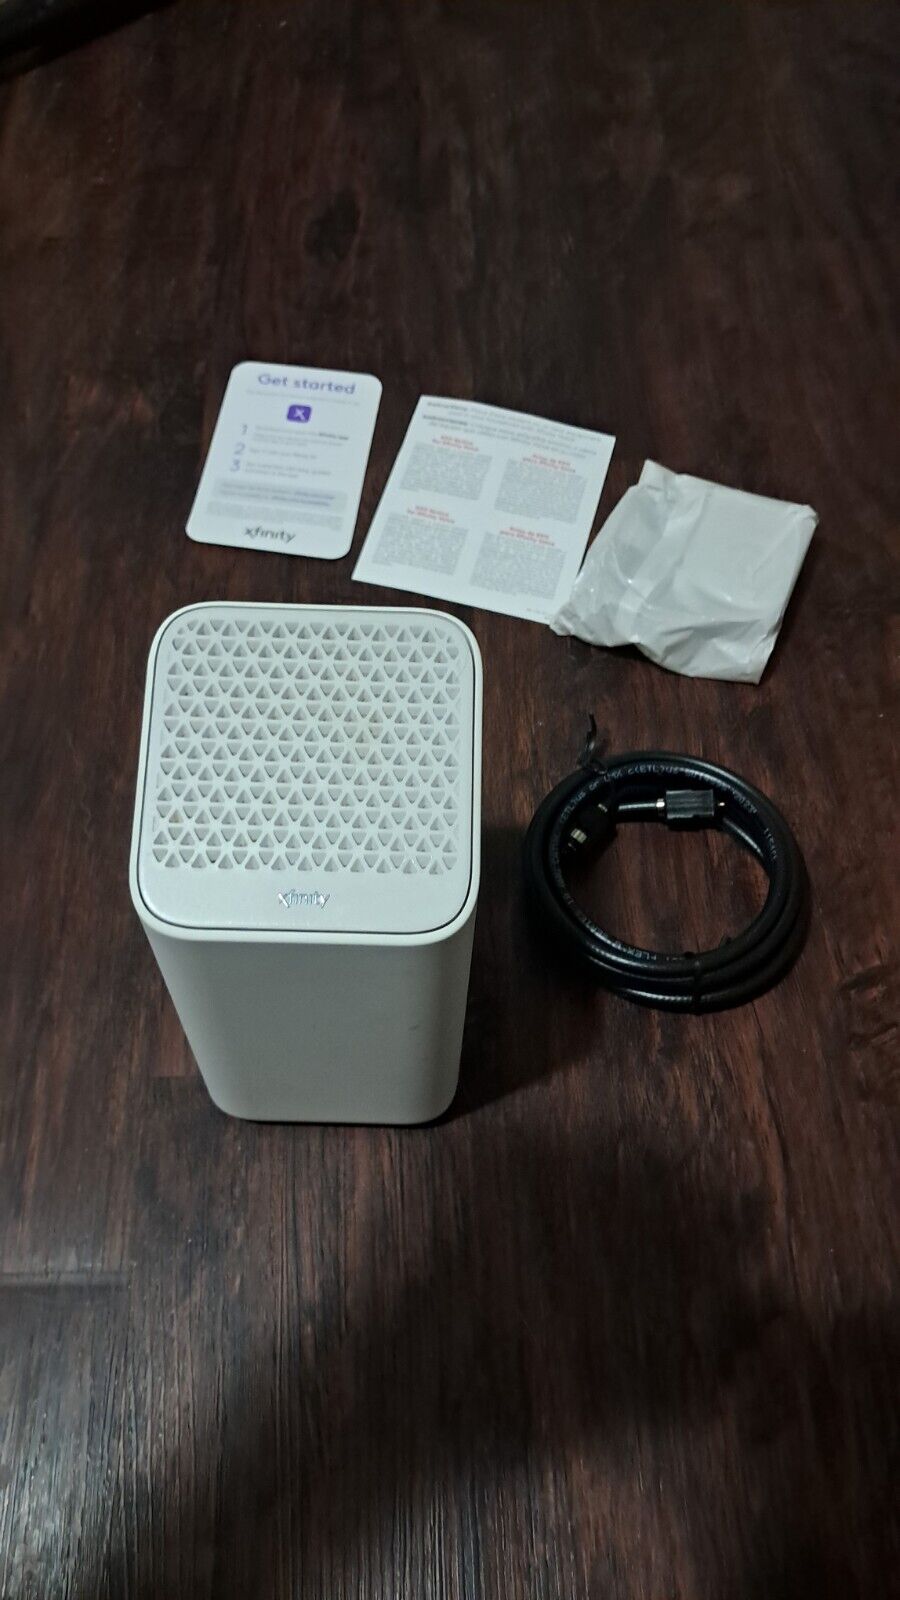 Xfinity Home WiFi Router Modem XB7T White With Power Adapter